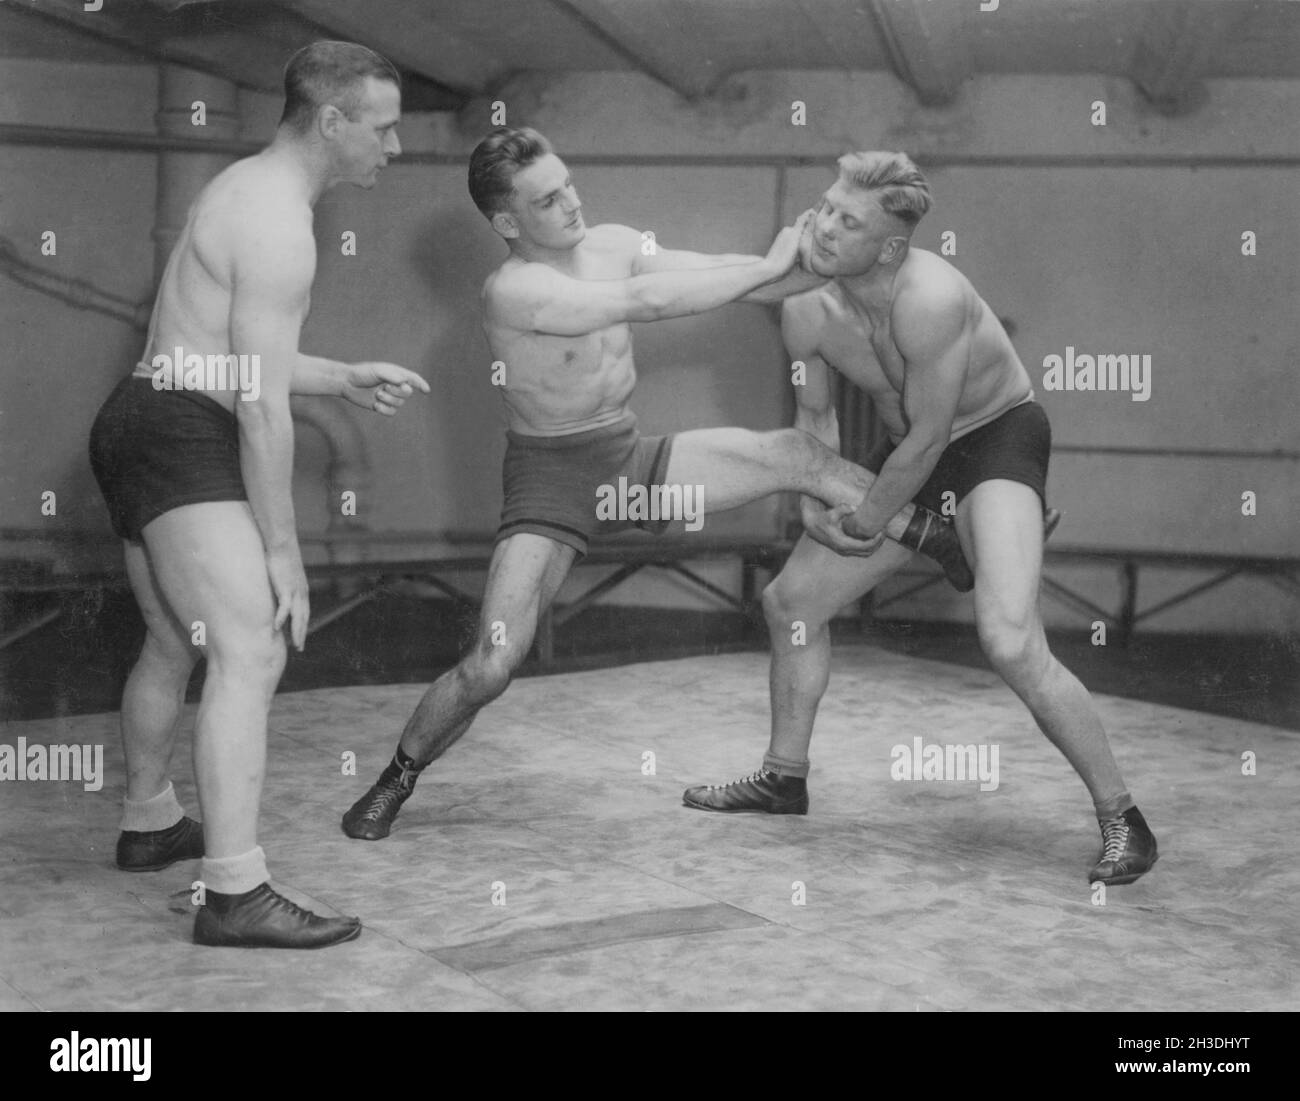 Wrestling in the 1930s. Swedish olympic wrestling champion Ivar Johansson 1903-1979 to the left wrestling with american wrestler Baker. Both wrestlers appears to have grips on each other and it's difficult to tell who has the overhand. Stock Photo